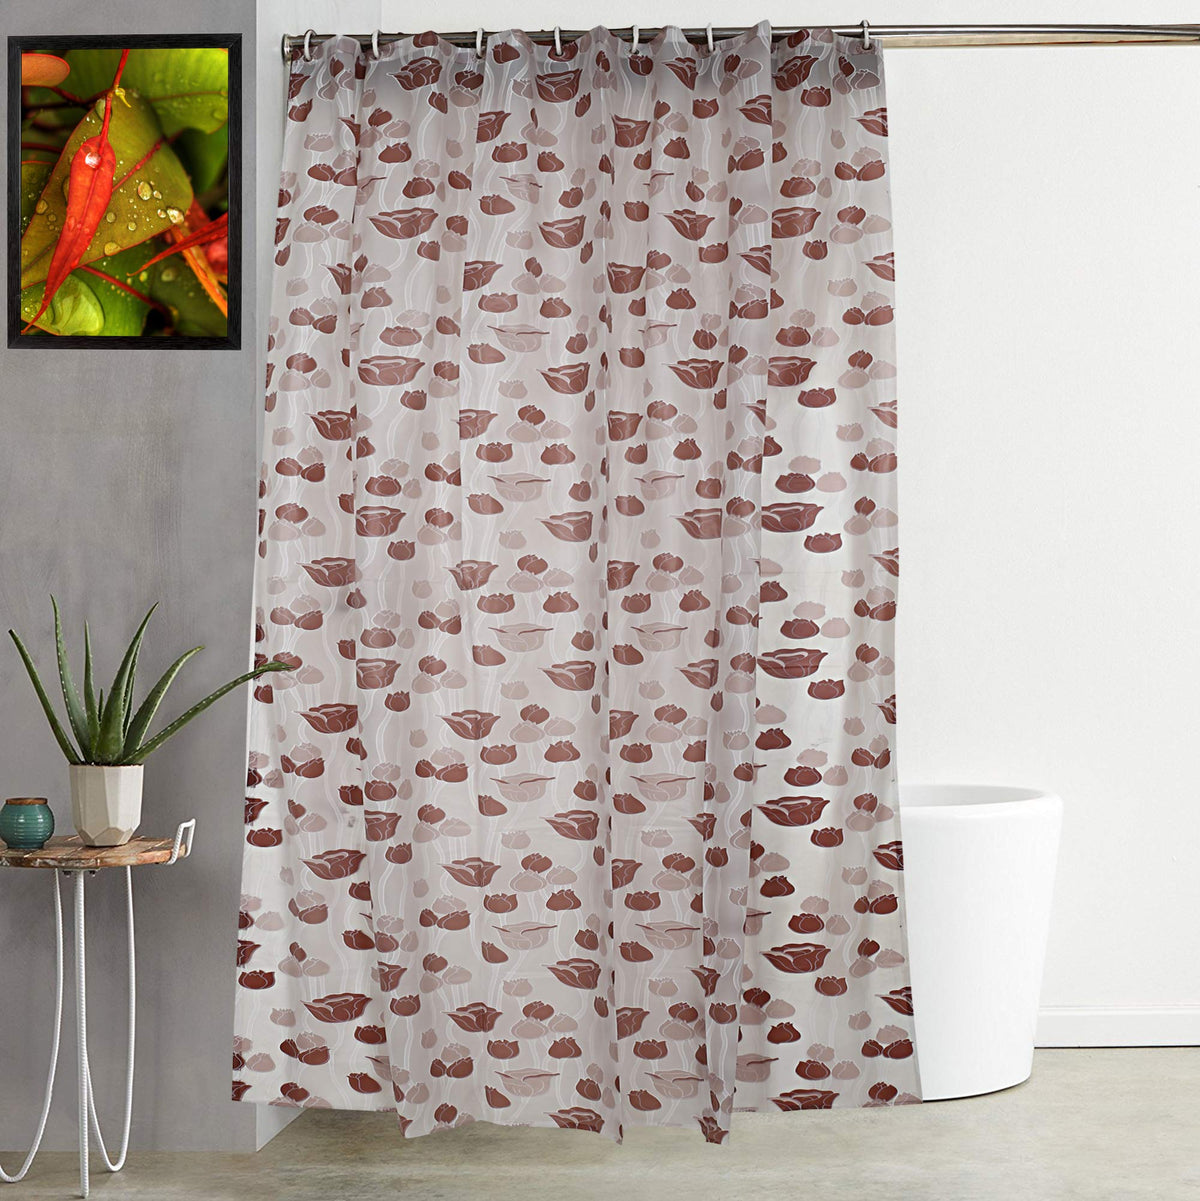 Kuber Industries PVC Floral Design Shower Curtain with Hooks (Brown)